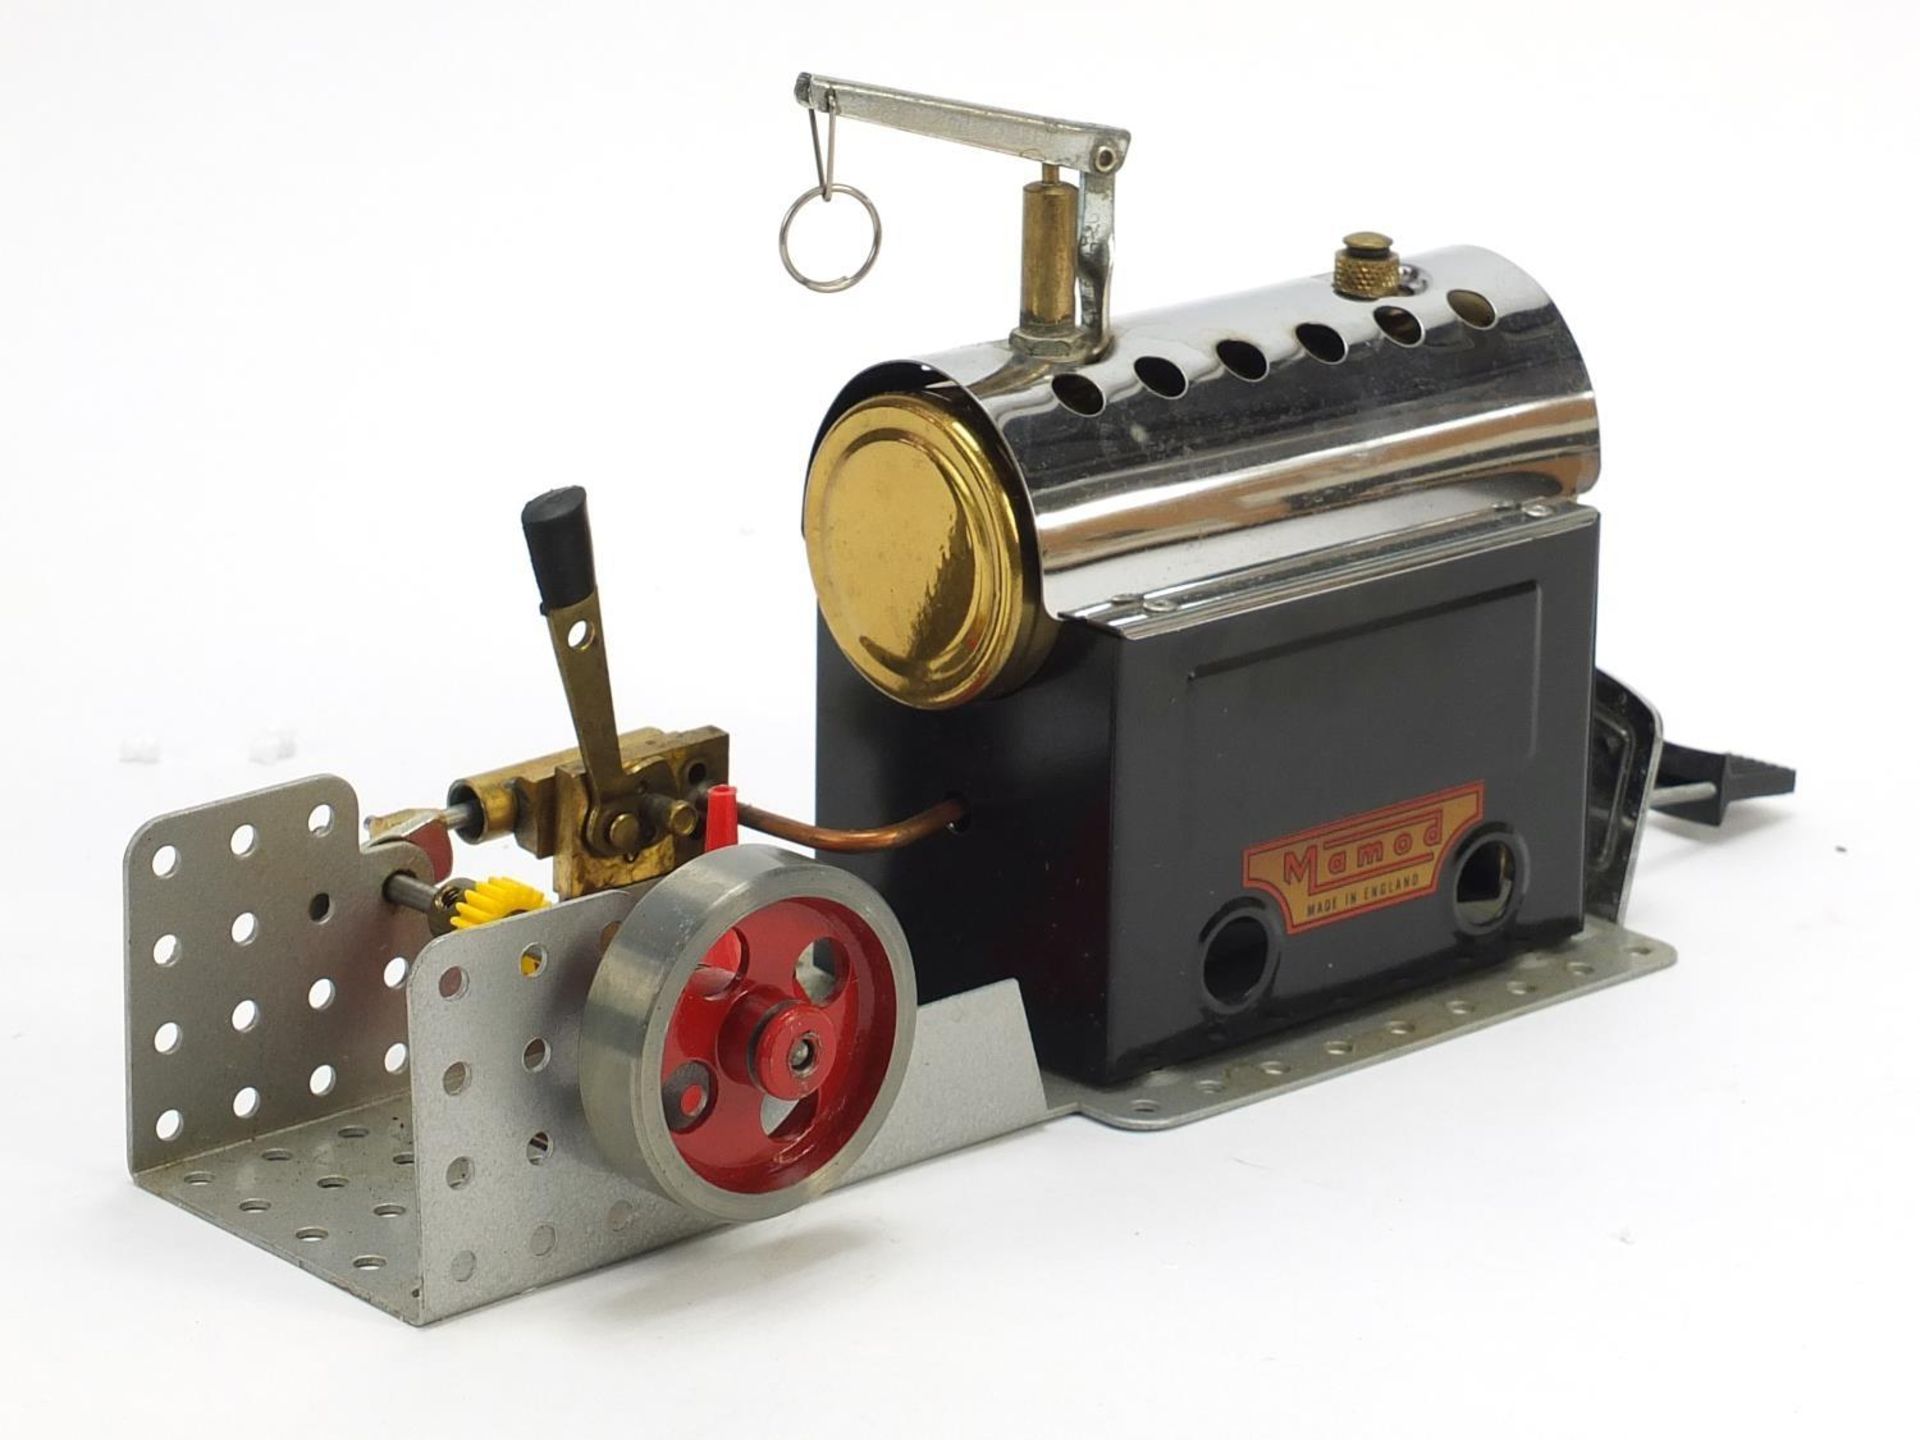 Mamod SP3 steam engine with box - Image 3 of 4